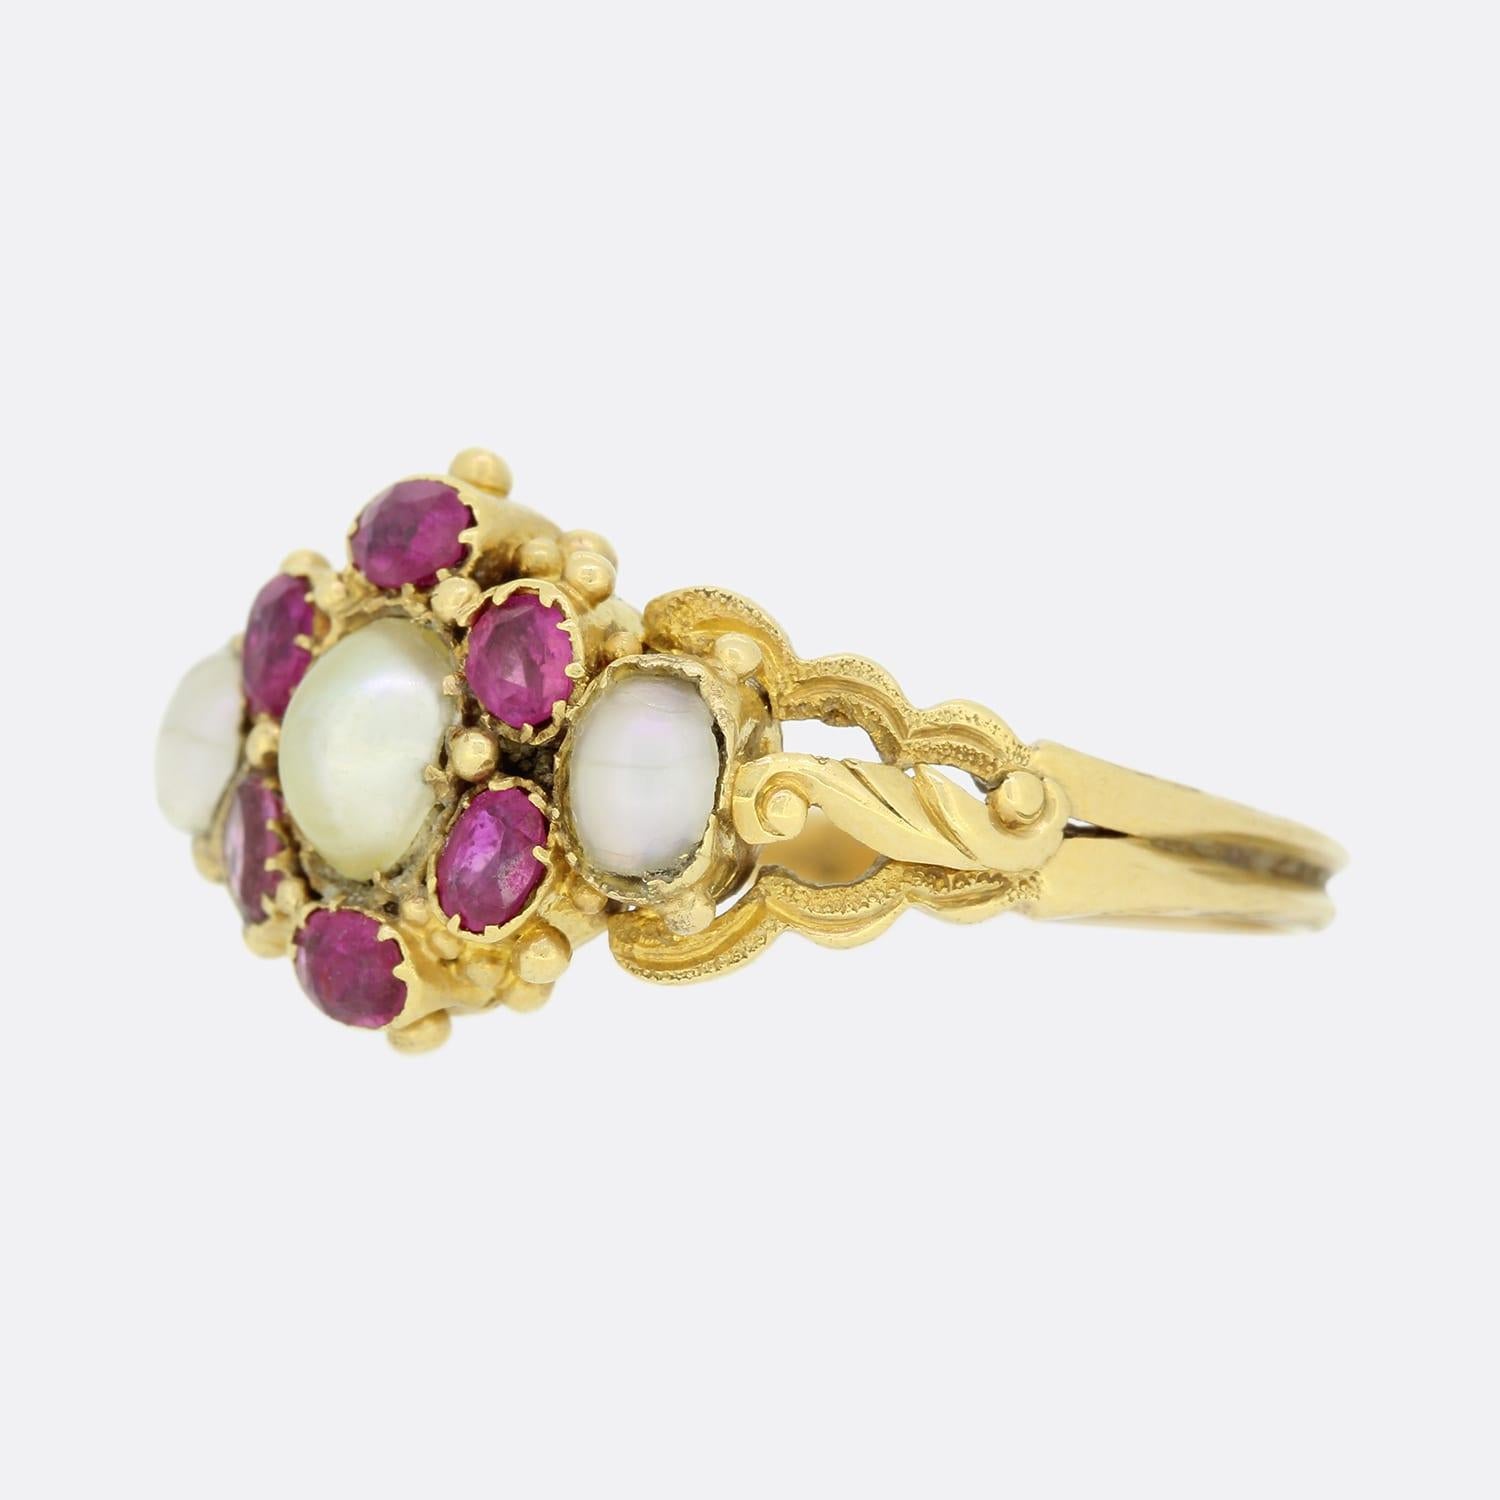 This is a wonderful Victorian 18ct yellow gold cluster ring. The centre of the cluster is a lovely natural pearl that is surrounded by a cluster of 6 old cut rubies. On each side of the cluster there is a further well matched natural pearl. The